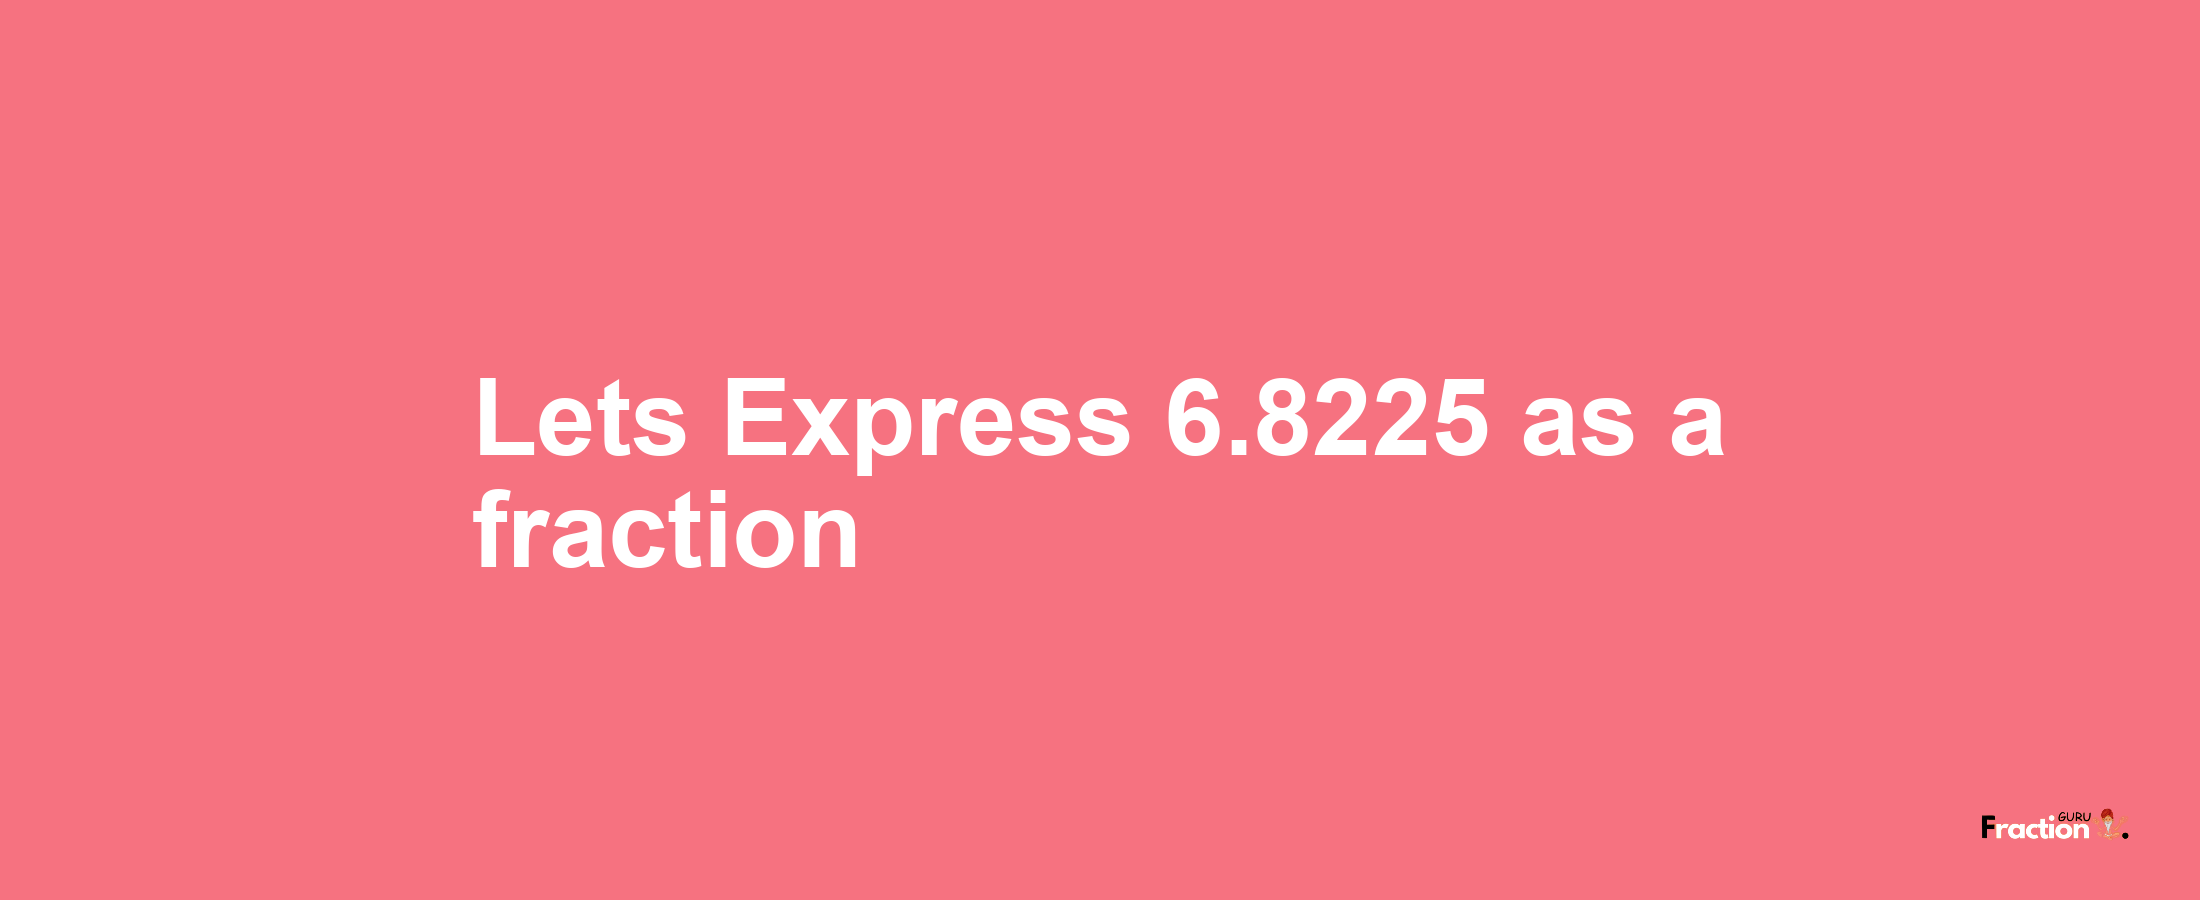 Lets Express 6.8225 as afraction